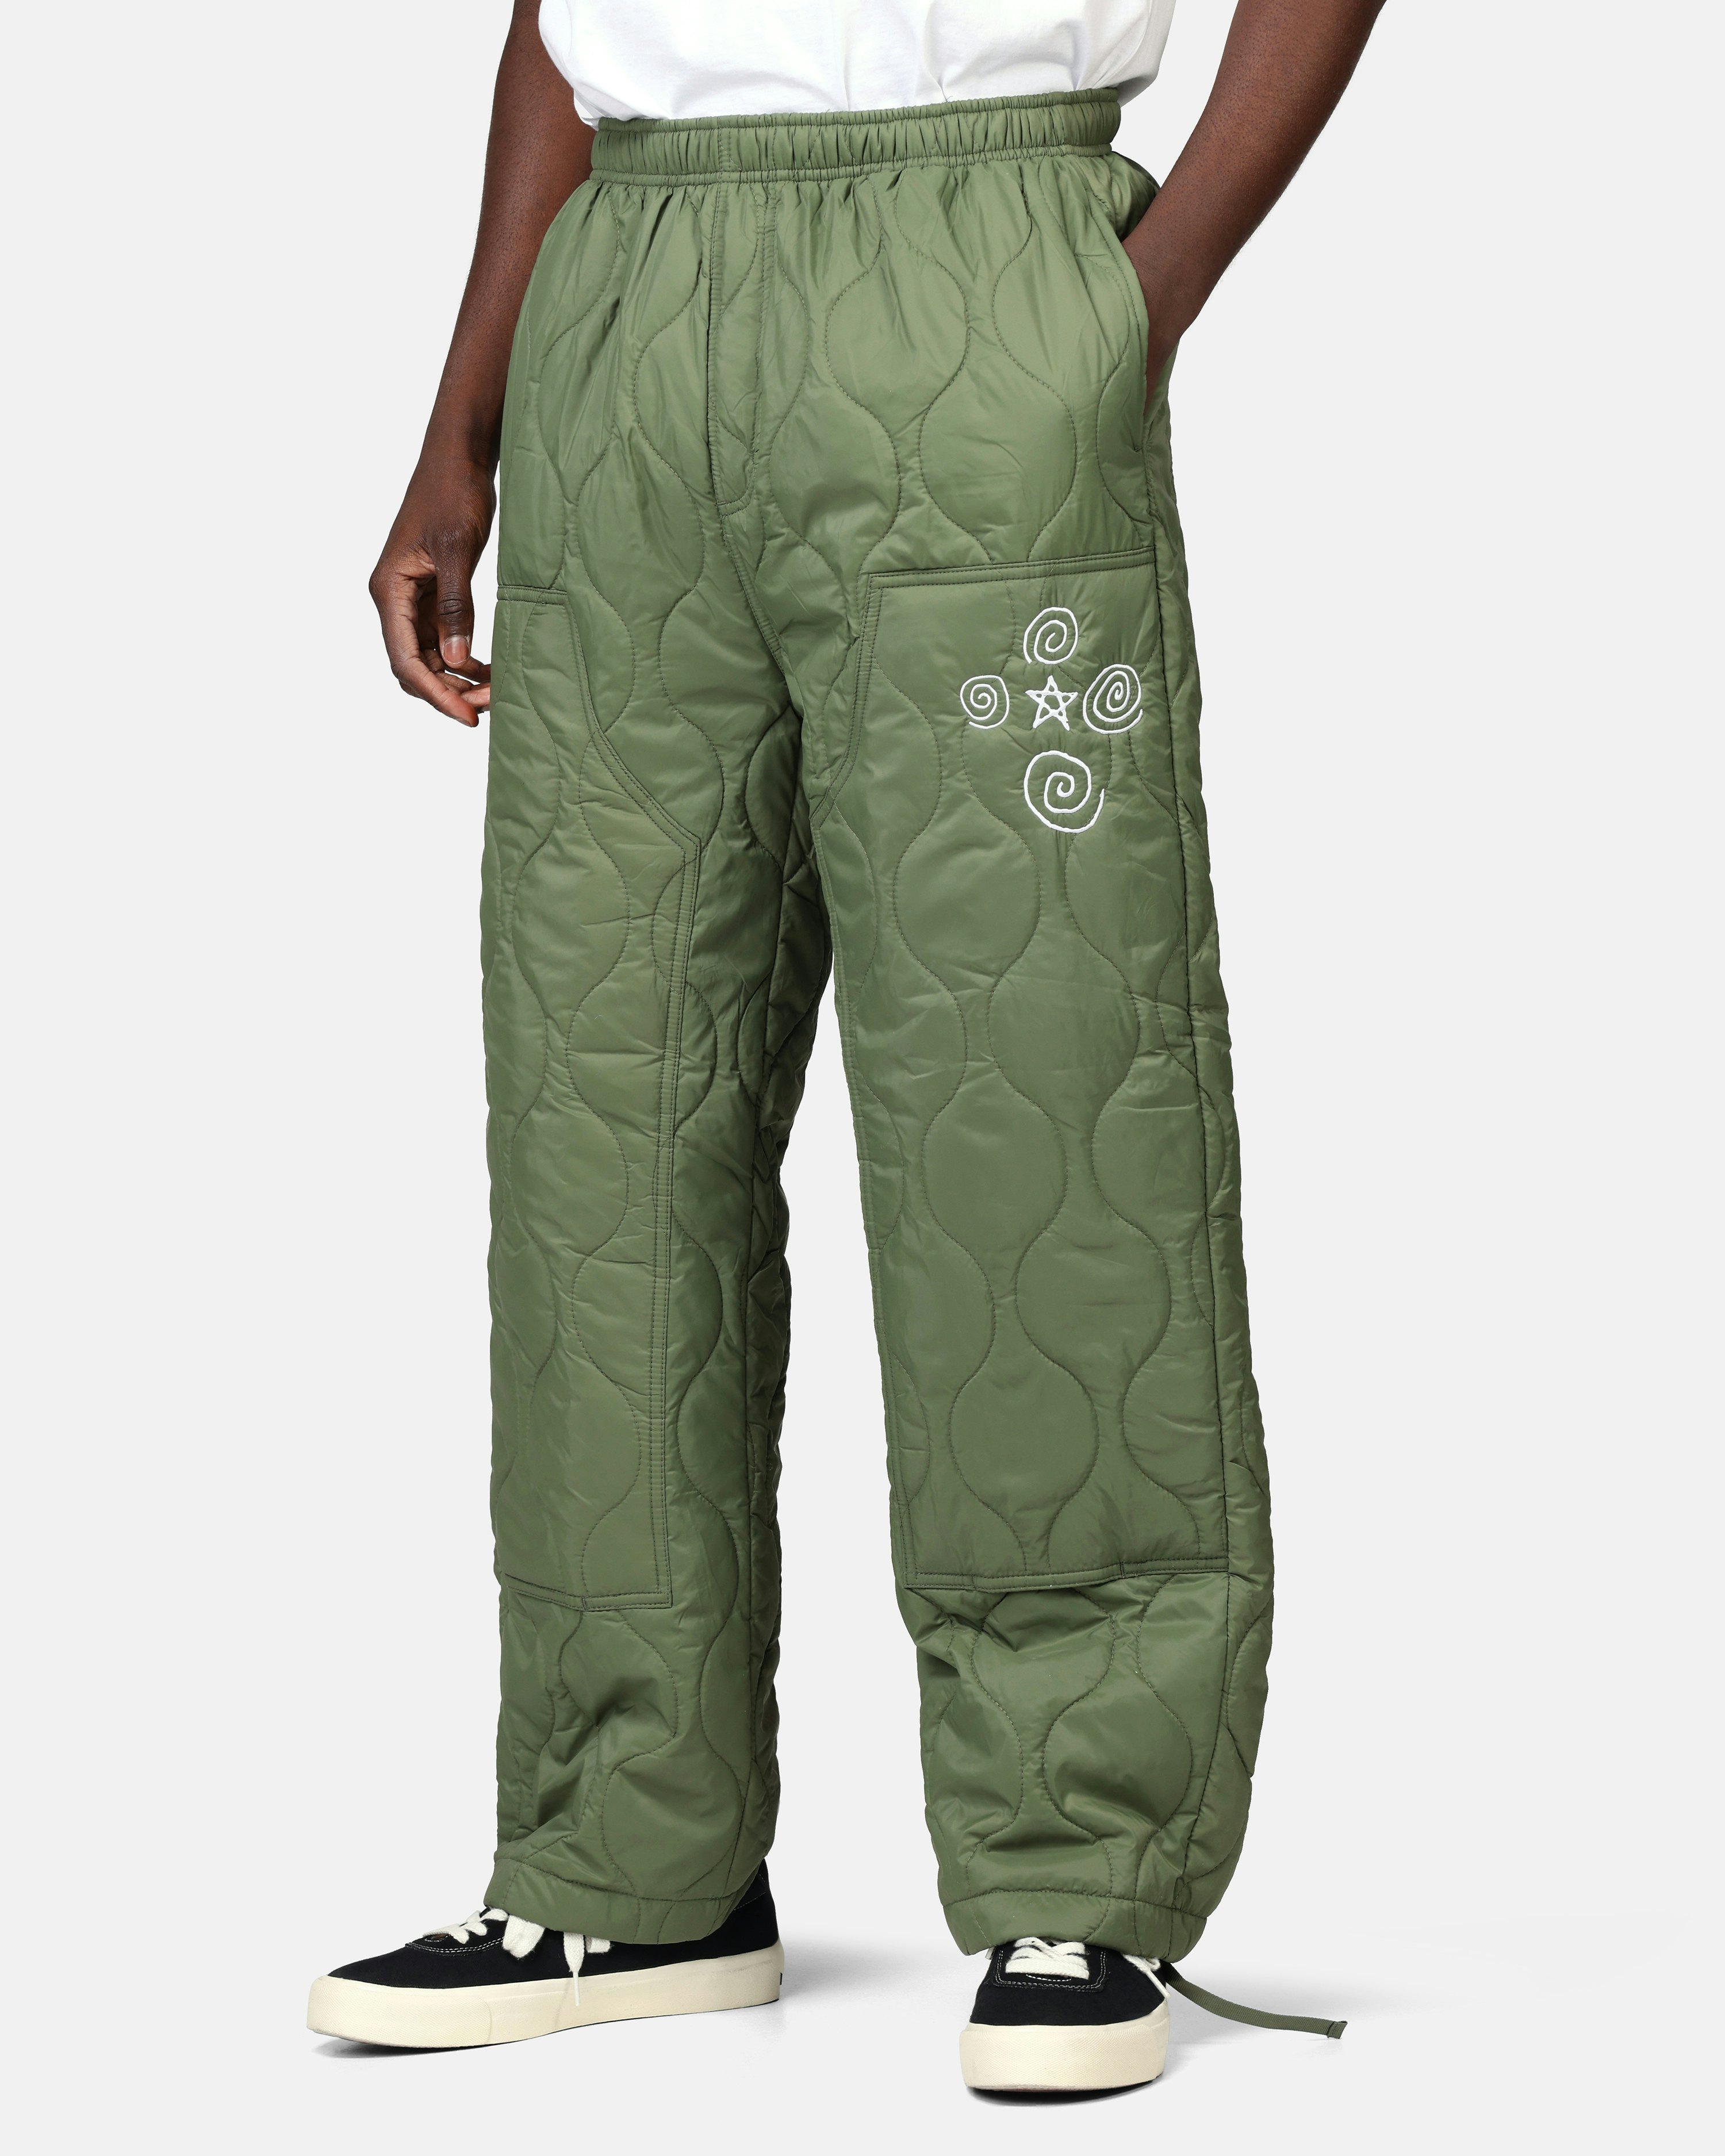 Obey Pant- Baseline Quilted Army green, Men